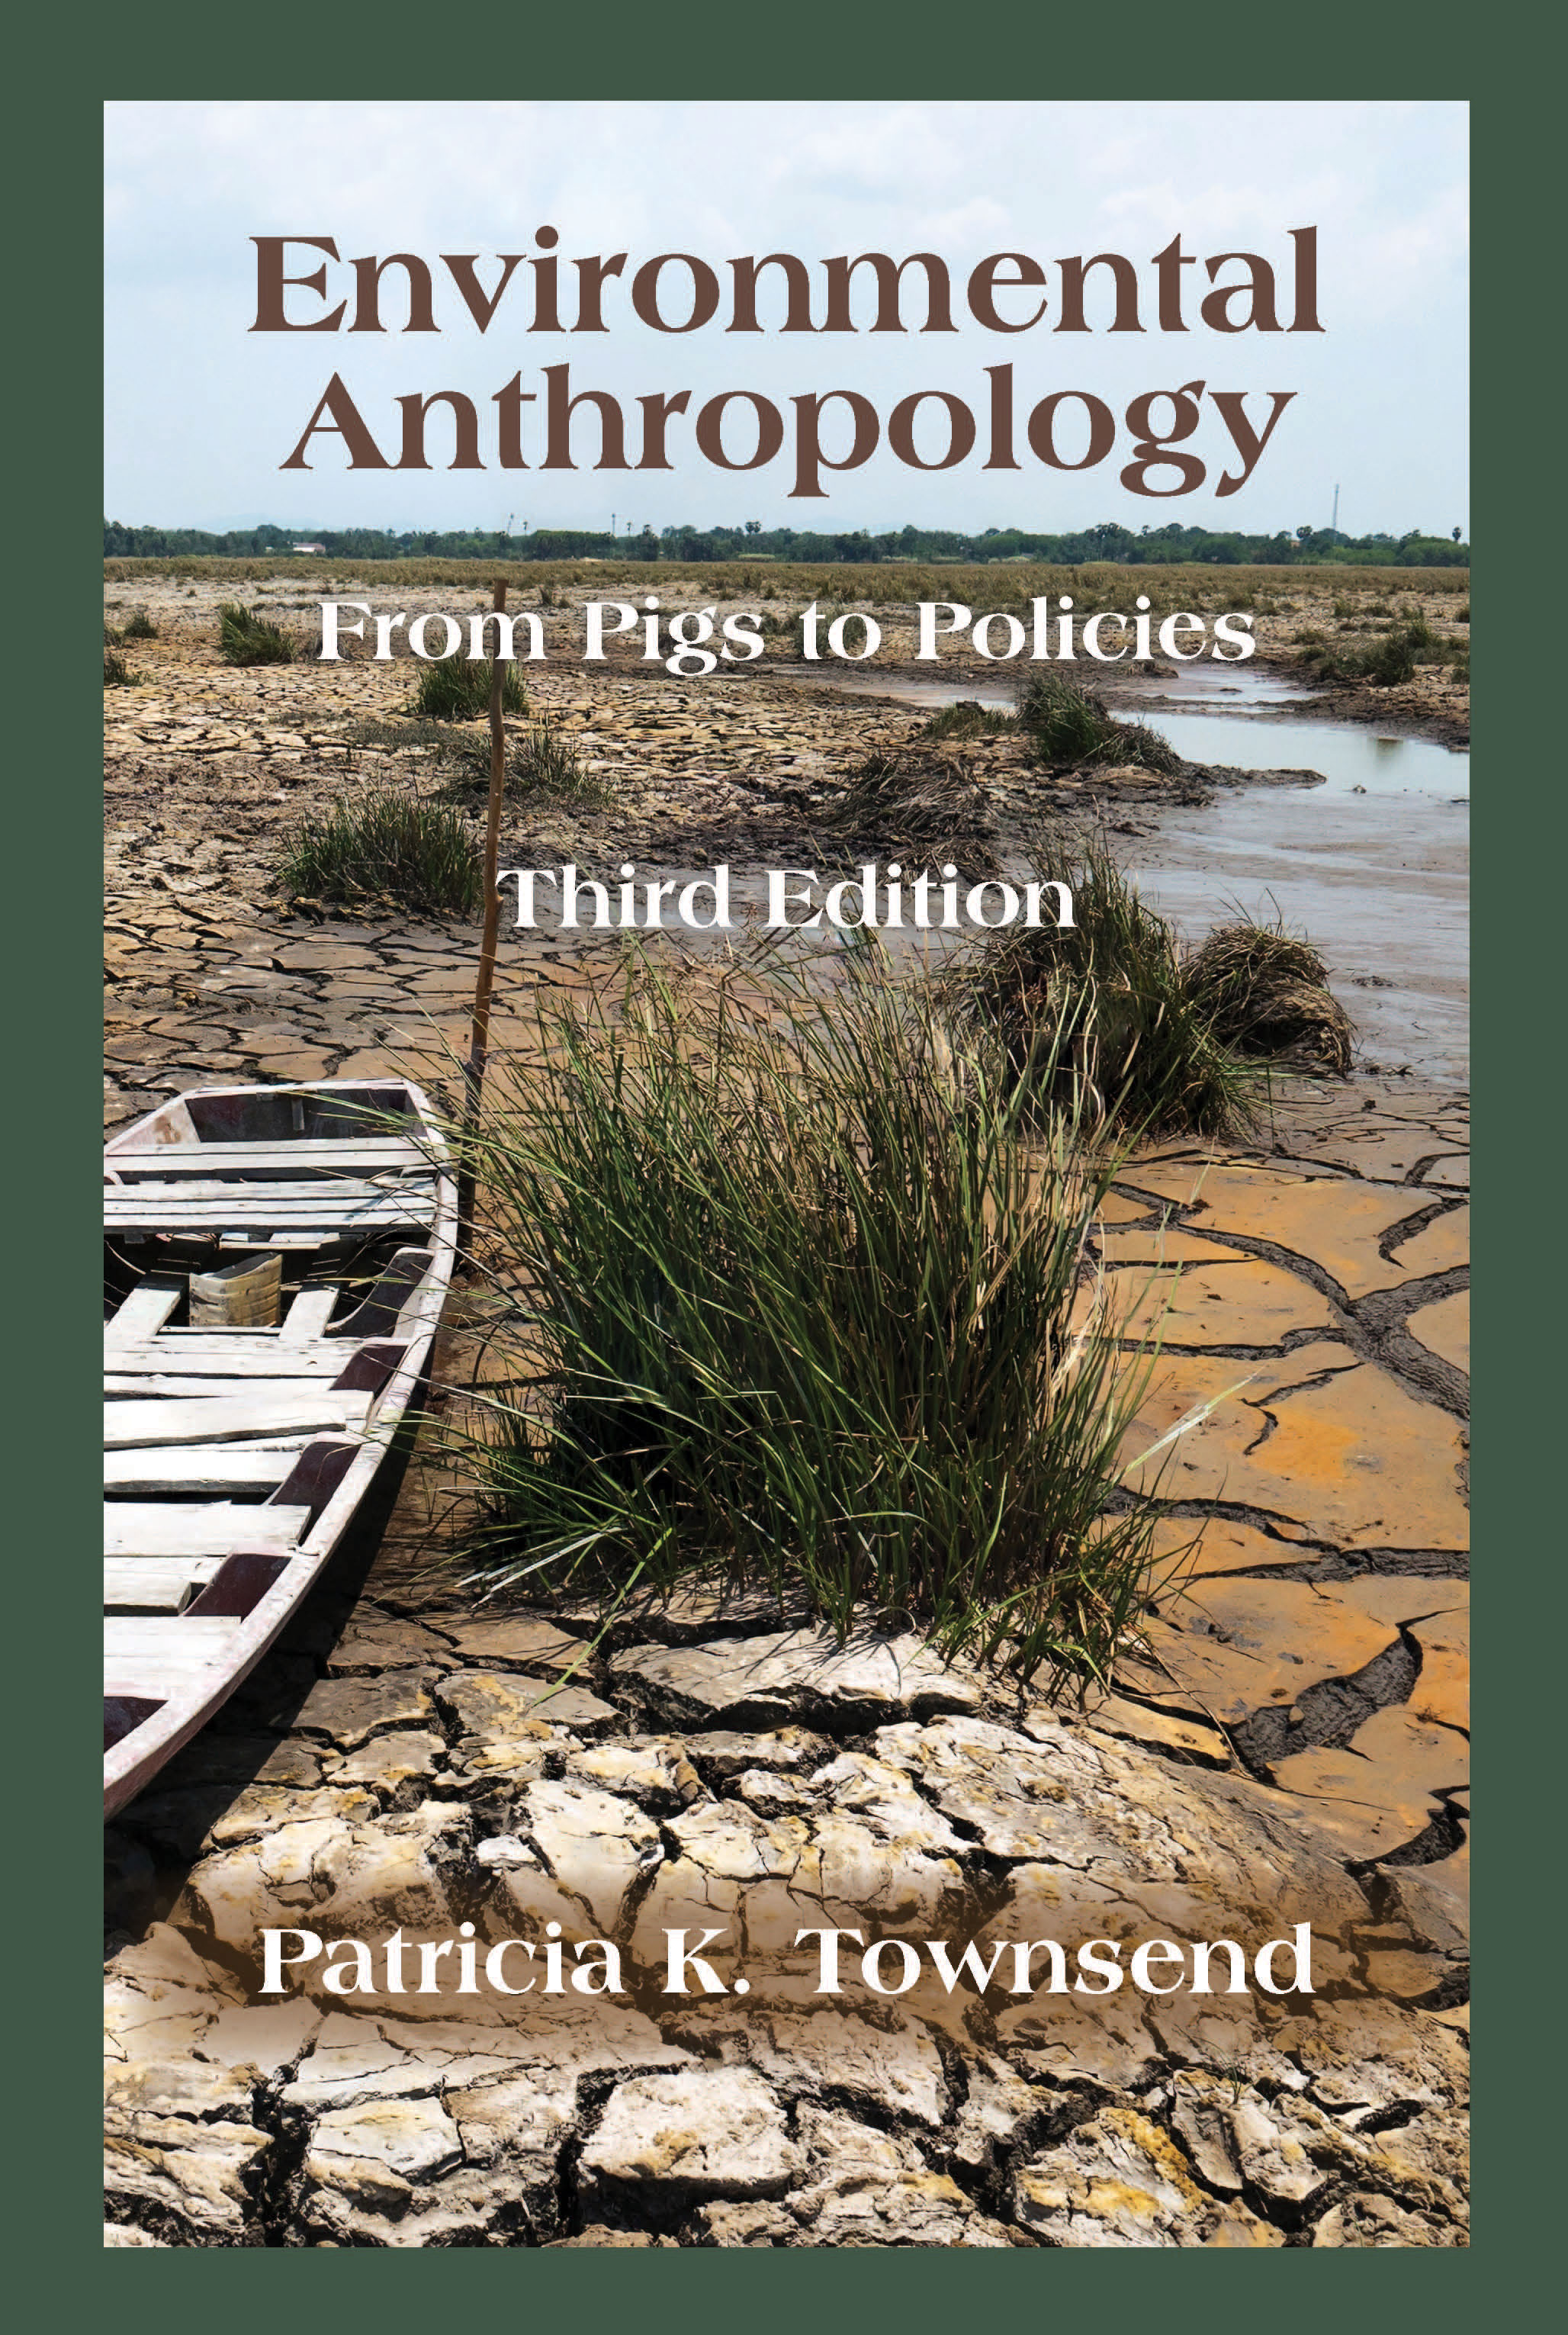 Environmental Anthropology: From Pigs to Policies, Third Edition by Patricia K. Townsend